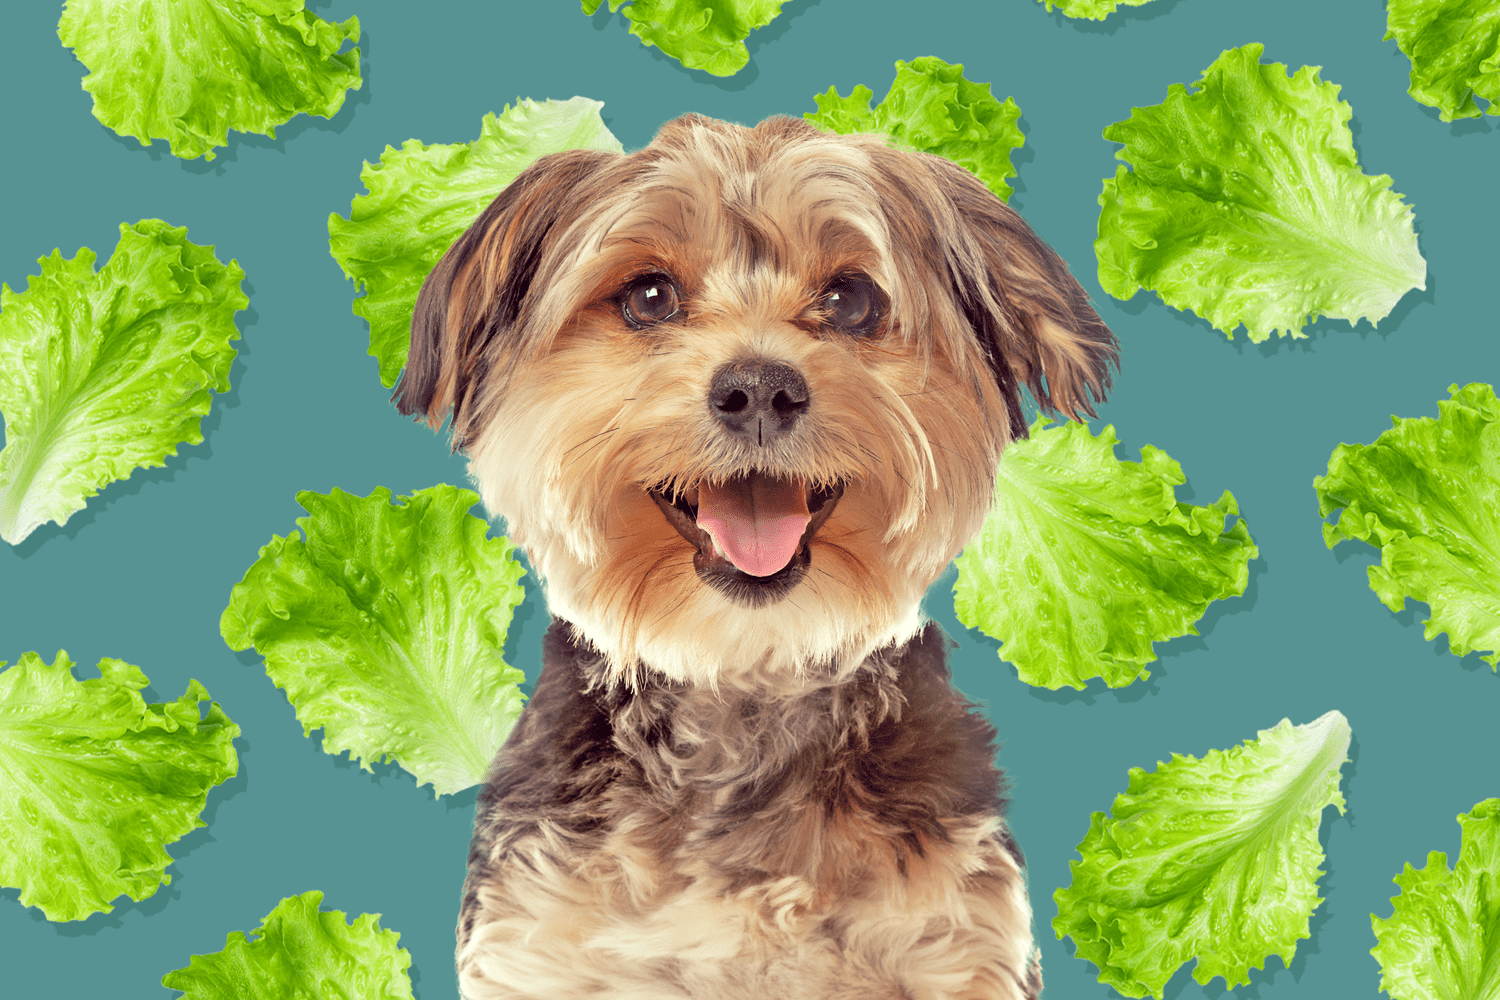 Can Dogs Eat Lettuce? Here's What a Vet Says